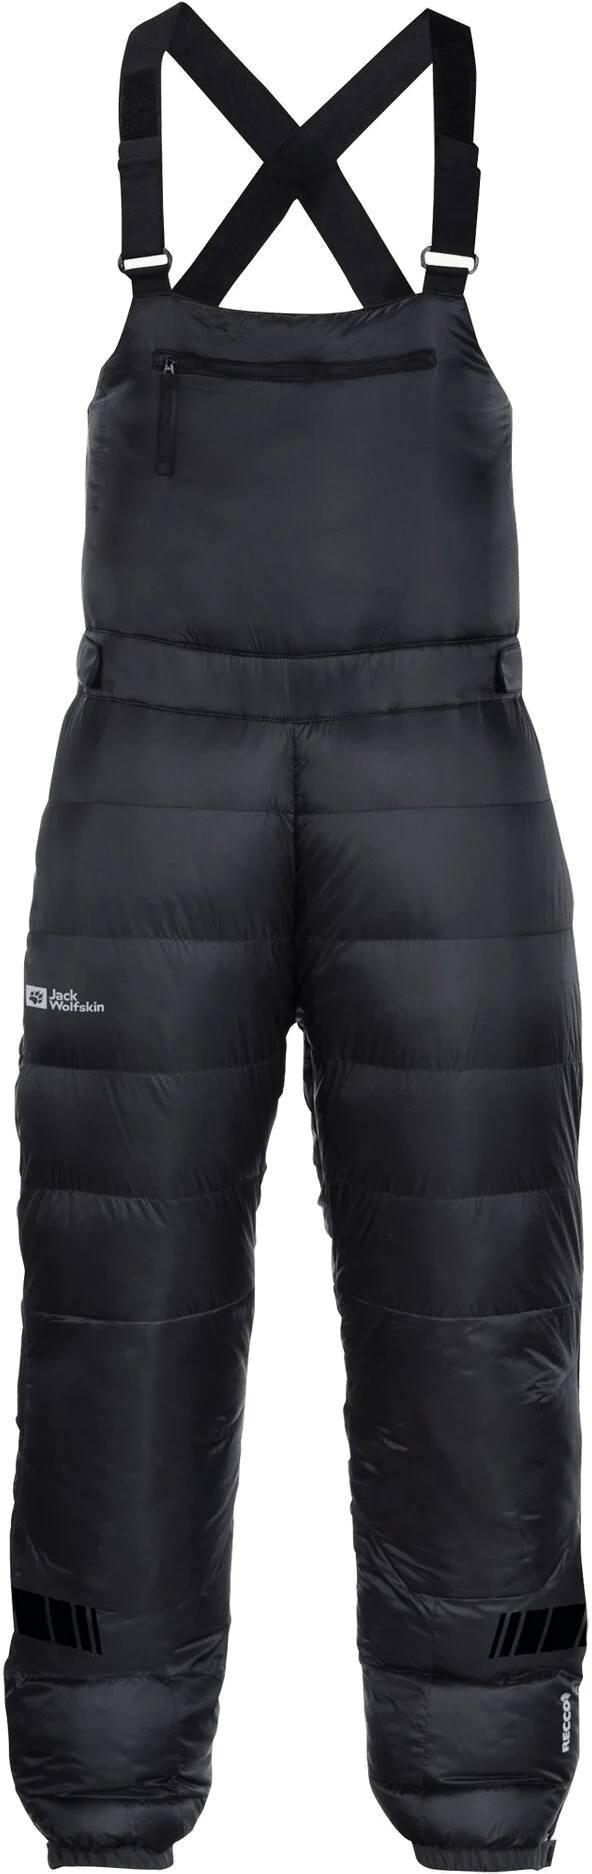 Image of Jack Wolfskin 1995 Series Down Pant